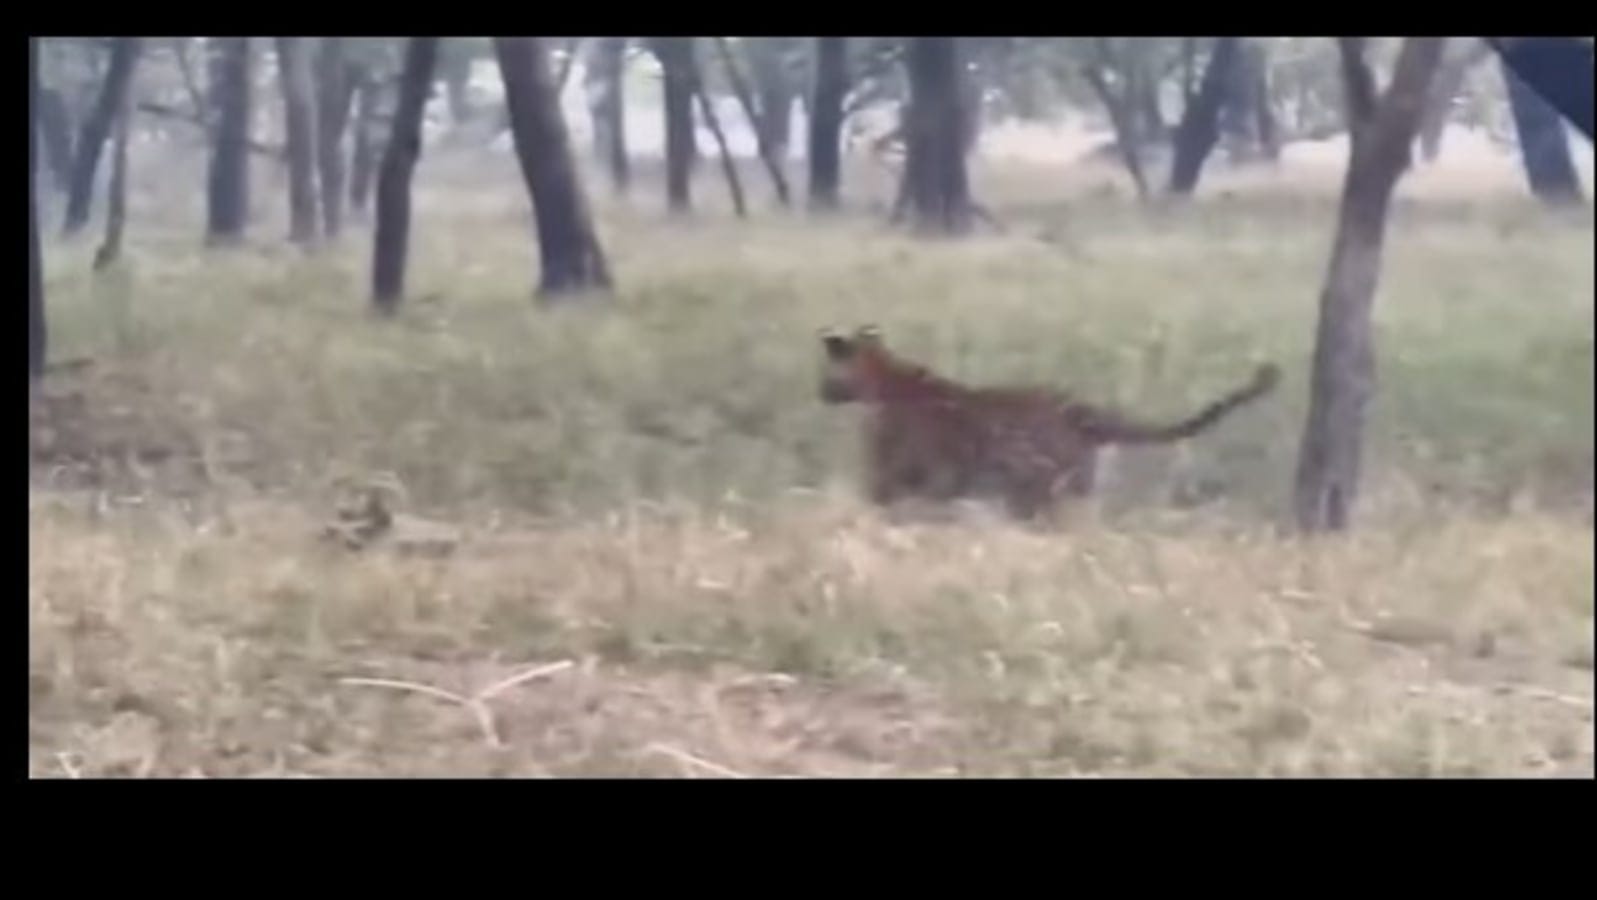 Safari goers shocked after witnessing 2 tigers fiercely chasing a deer in Ranthambore National Park